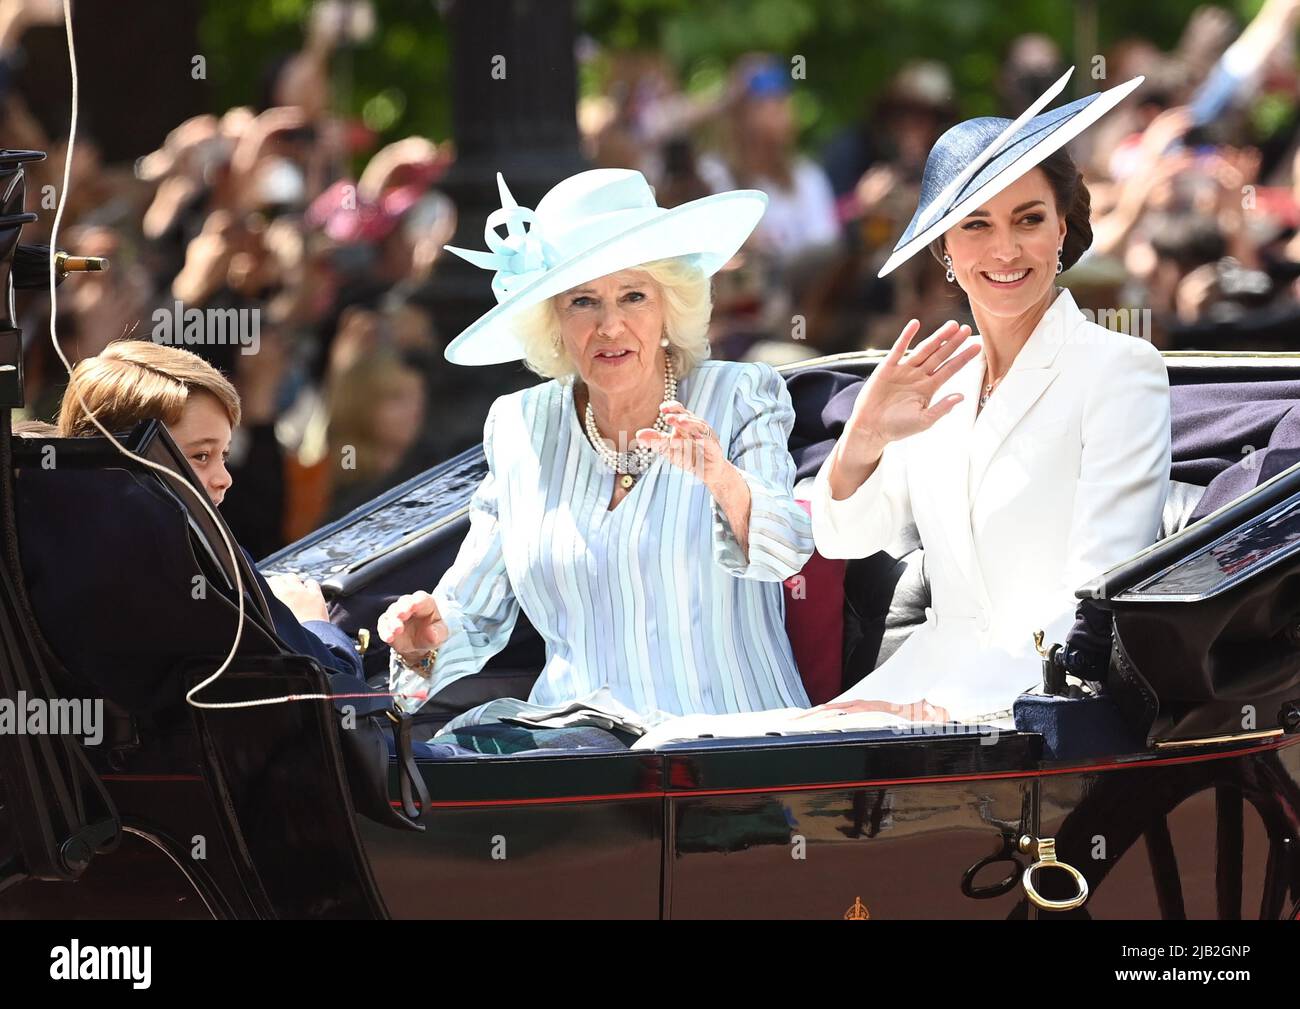 June 2nd, 2022. London, UK. The Duchess of Cambridge, Prince George and The Duchess of Cornwall riding in a carriage during Trooping the Colour, part of the Platinum Jubilee celebrations. Credit: Doug Peters/EMPICS/Alamy Live News Stock Photo